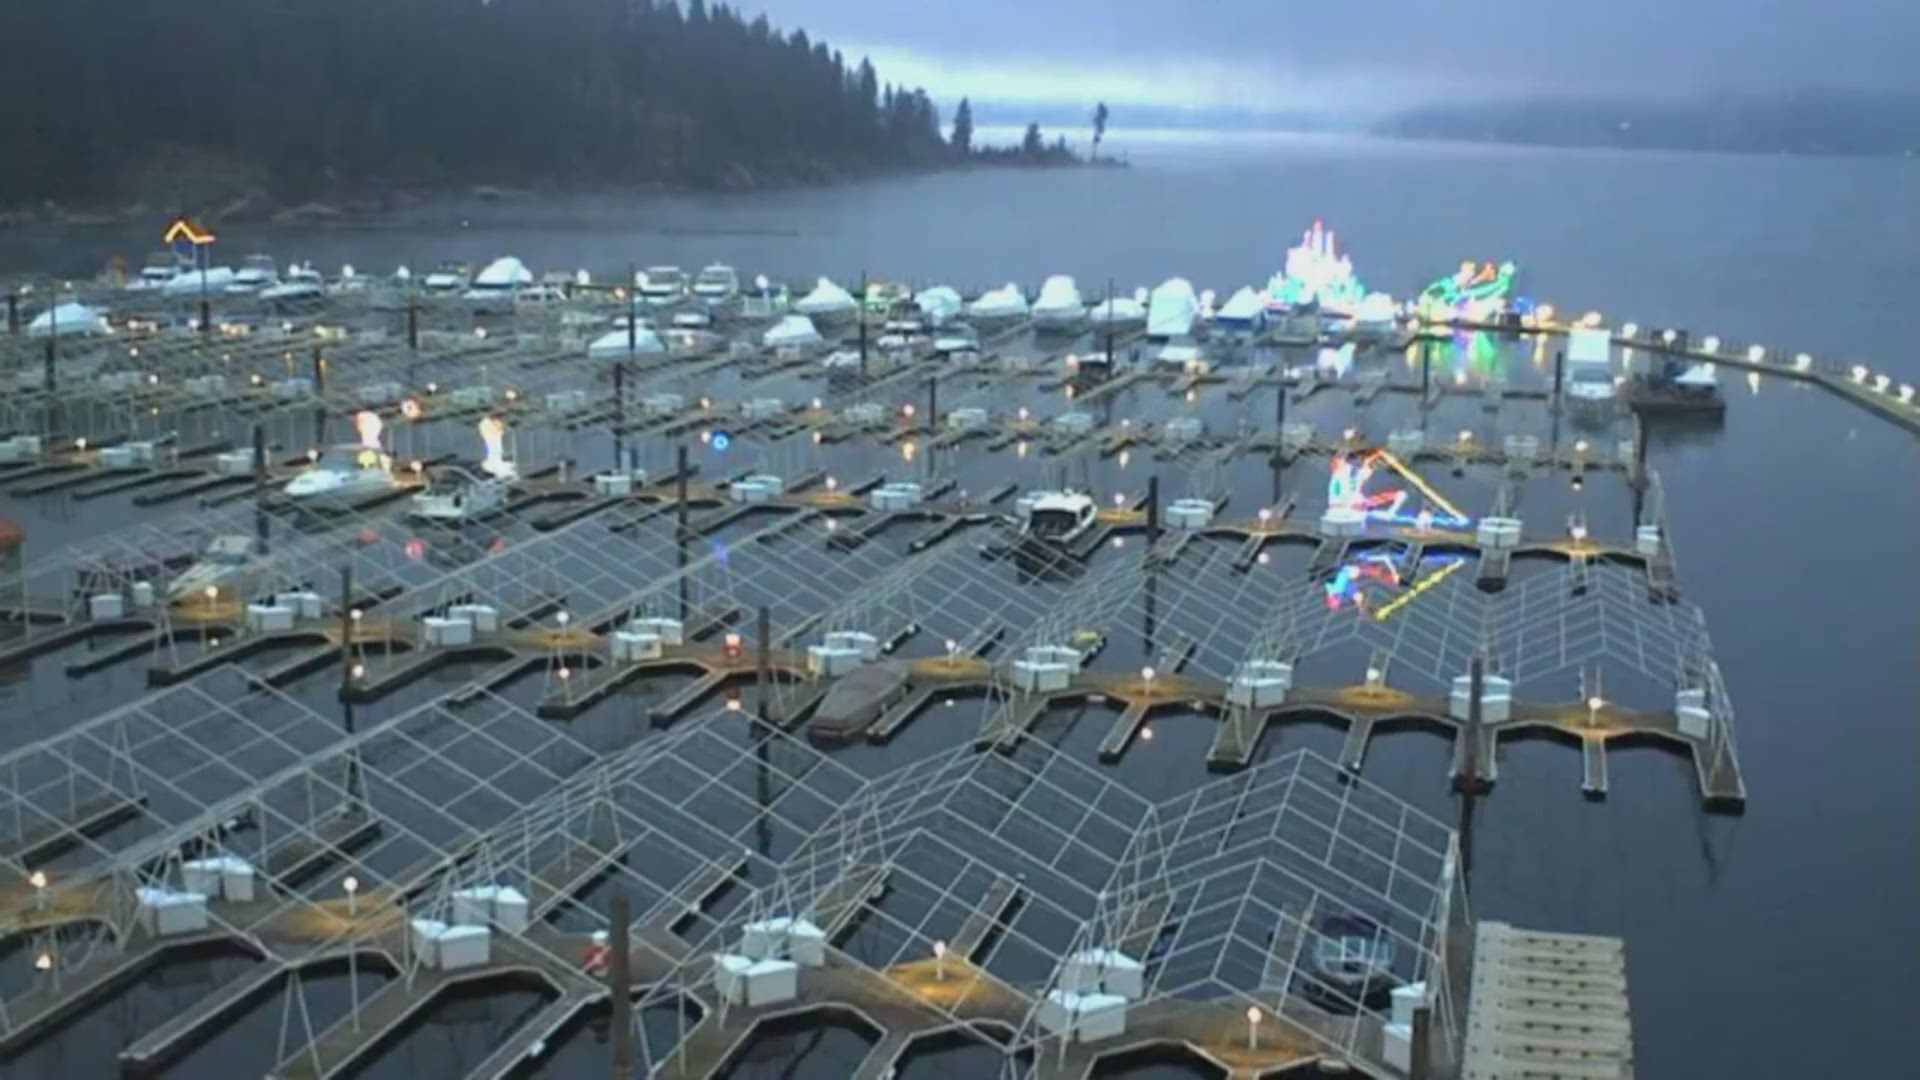 With the holiday season moving closer, decorations are popping up around Lake Coeur d'Alene leading up to the start of the Coeur d'Alene Resorts "Journey to the North Pole" Cruise.